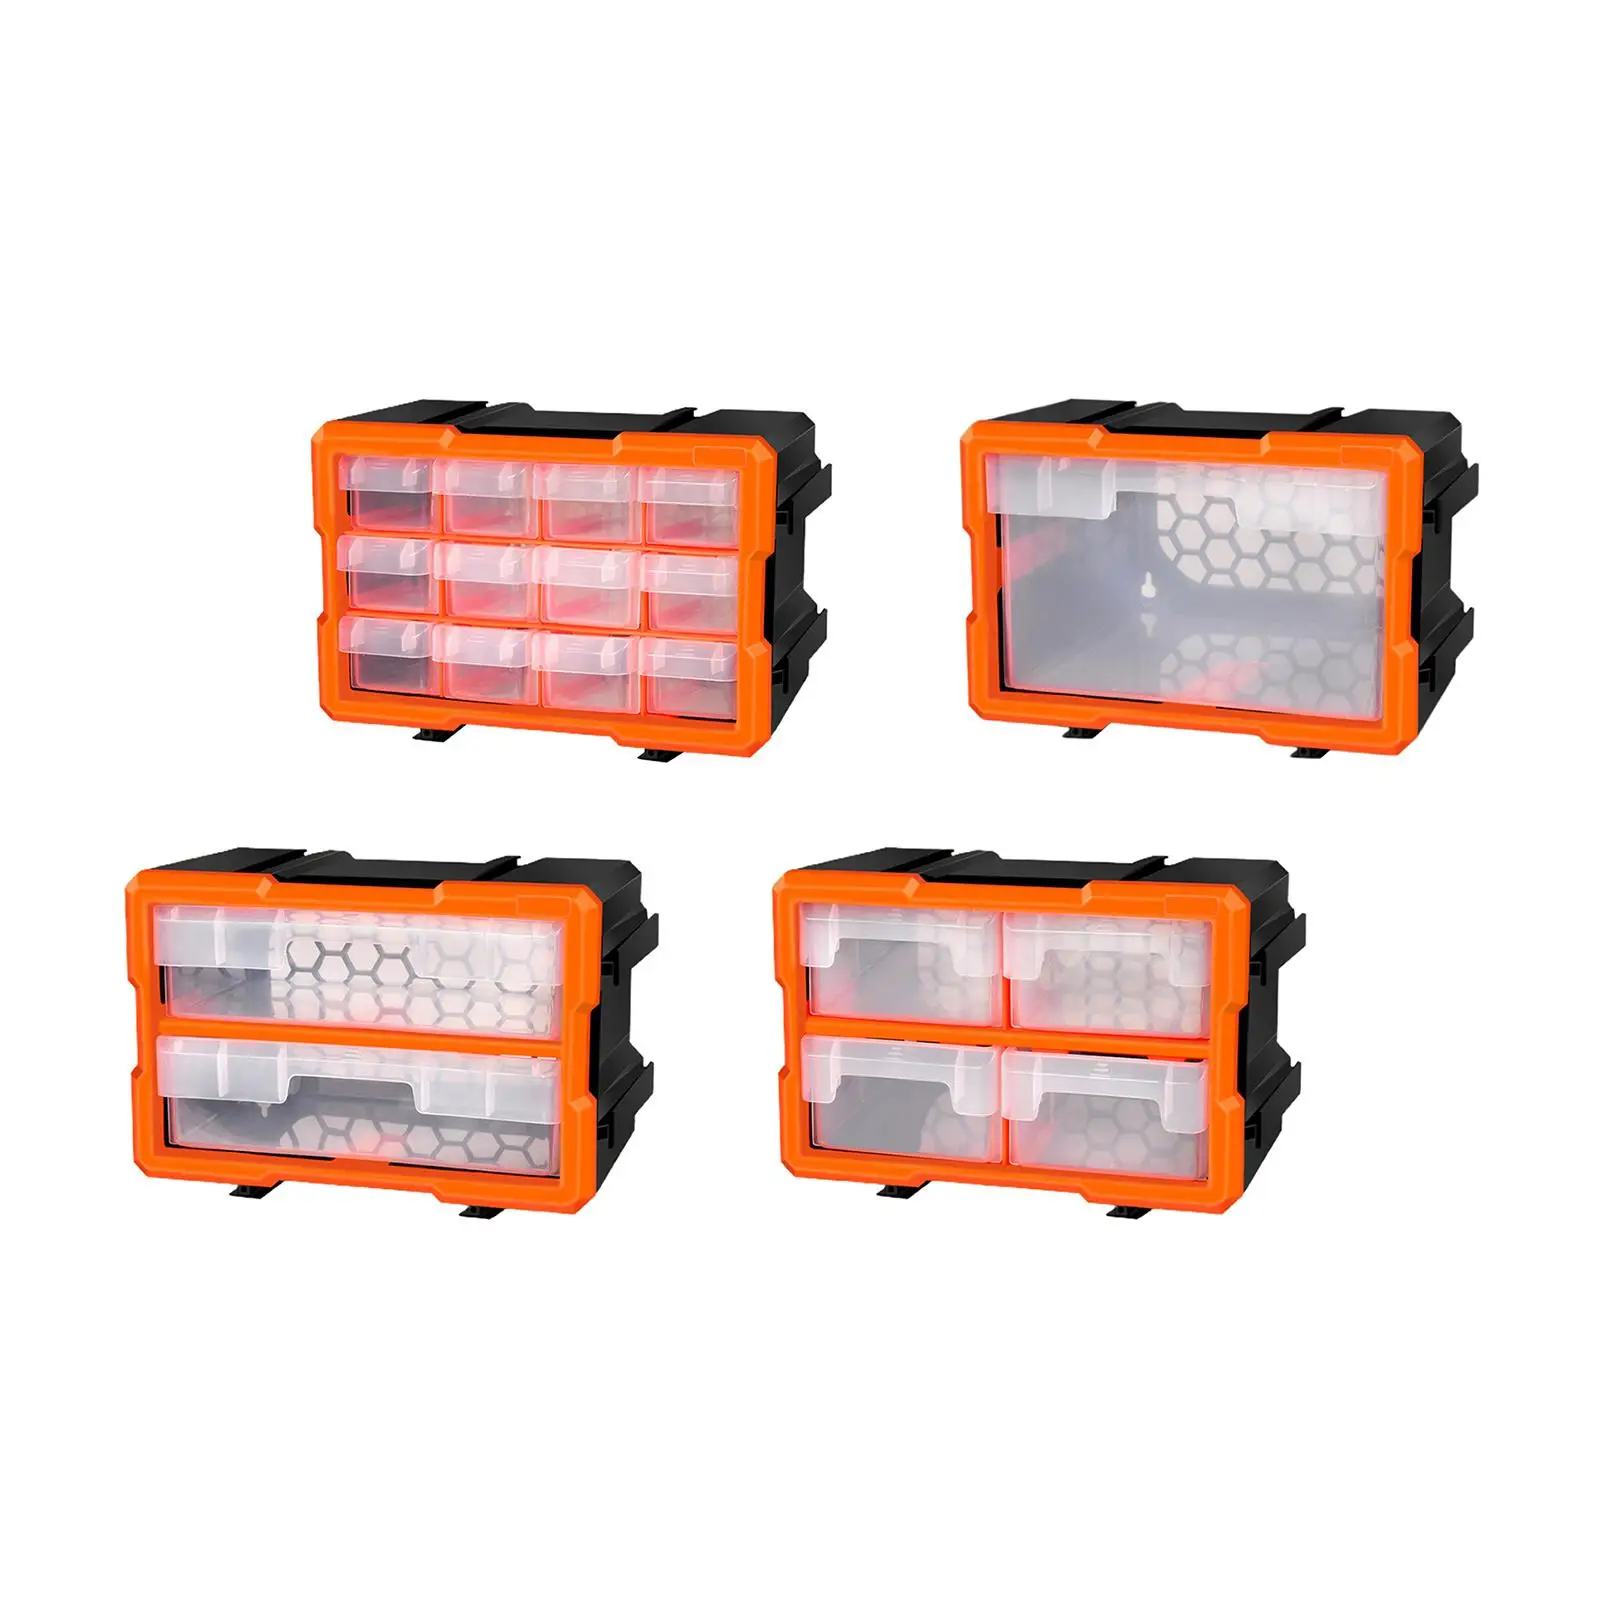 Gator Clamps Toolbox Organizer - Tool Organizer Nail Organizers - Parts  Case Storage Box - Screw Nuts and Bolt